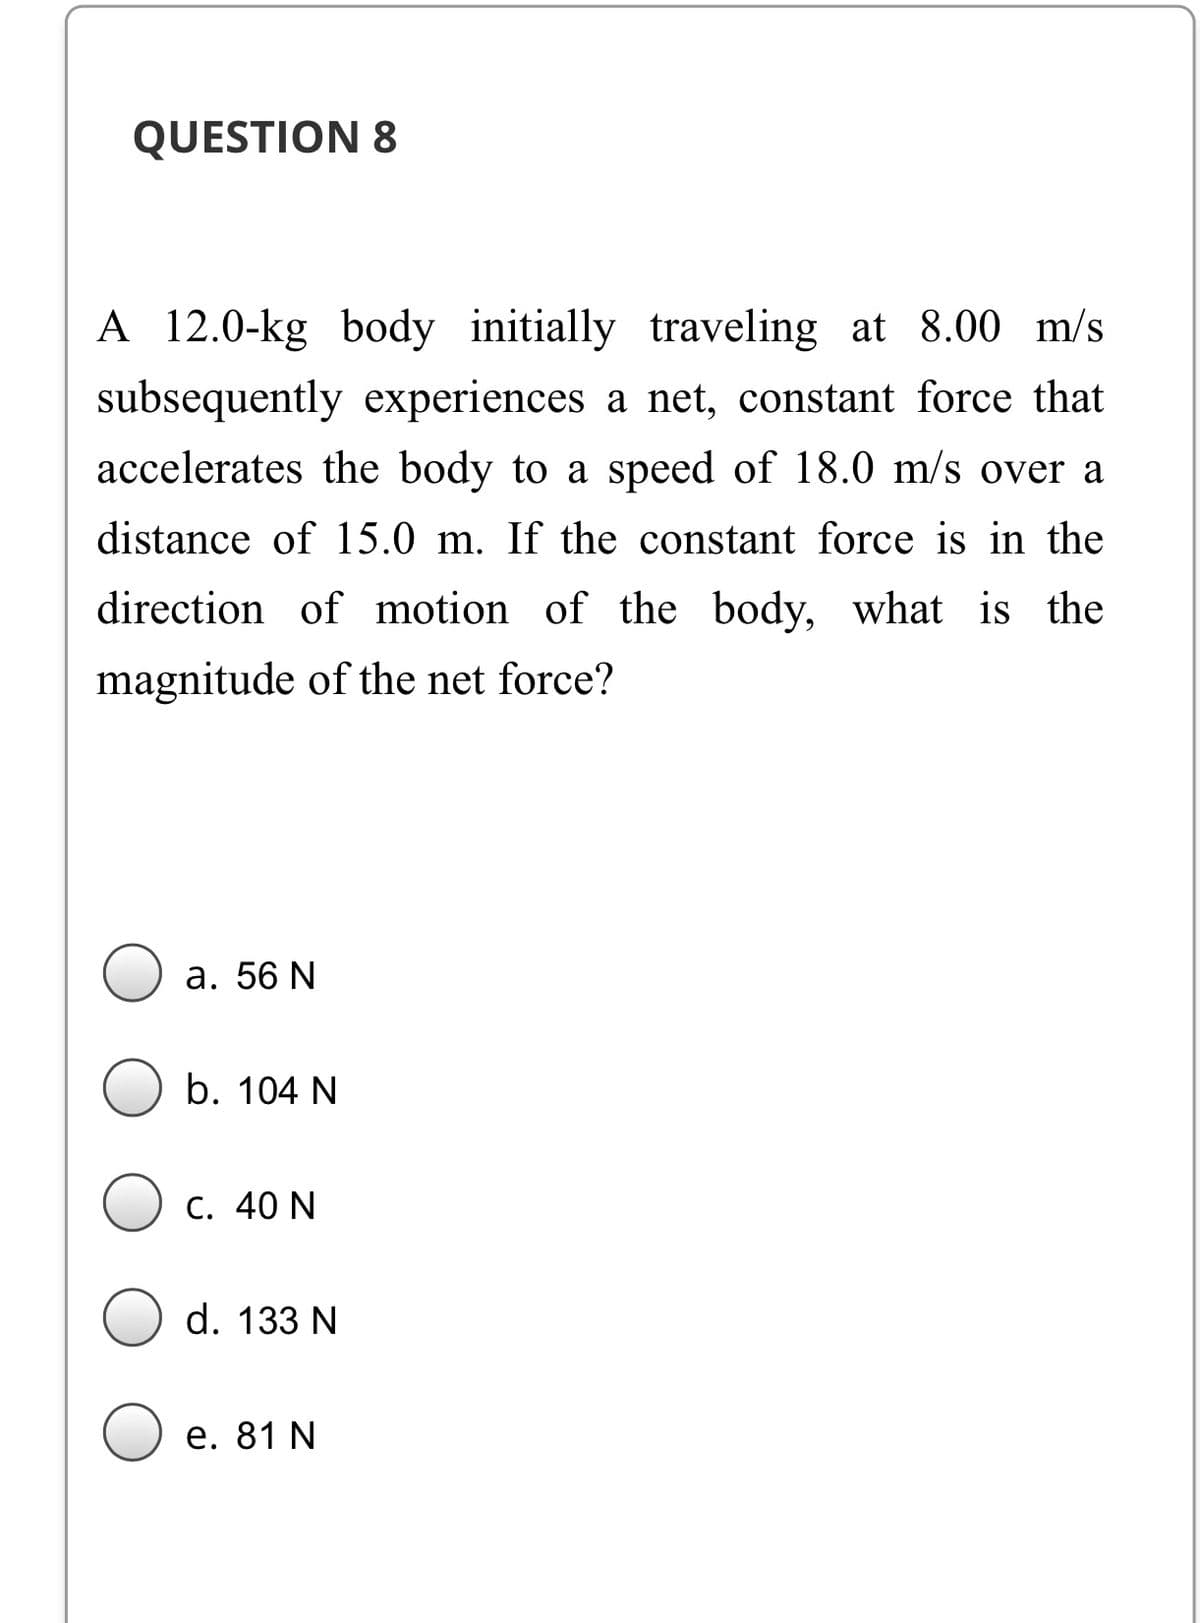 QUESTION 8
A 12.0-kg body initially traveling at 8.00 m/s
subsequently experiences a net, constant force that
accelerates the body to a speed of 18.0 m/s over a
distance of 15.0 m. If the constant force is in the
direction of motion of the body, what is the
magnitude of the net force?
а. 56 N
b. 104 N
C. 40 N
d. 133 N
е. 81 N
